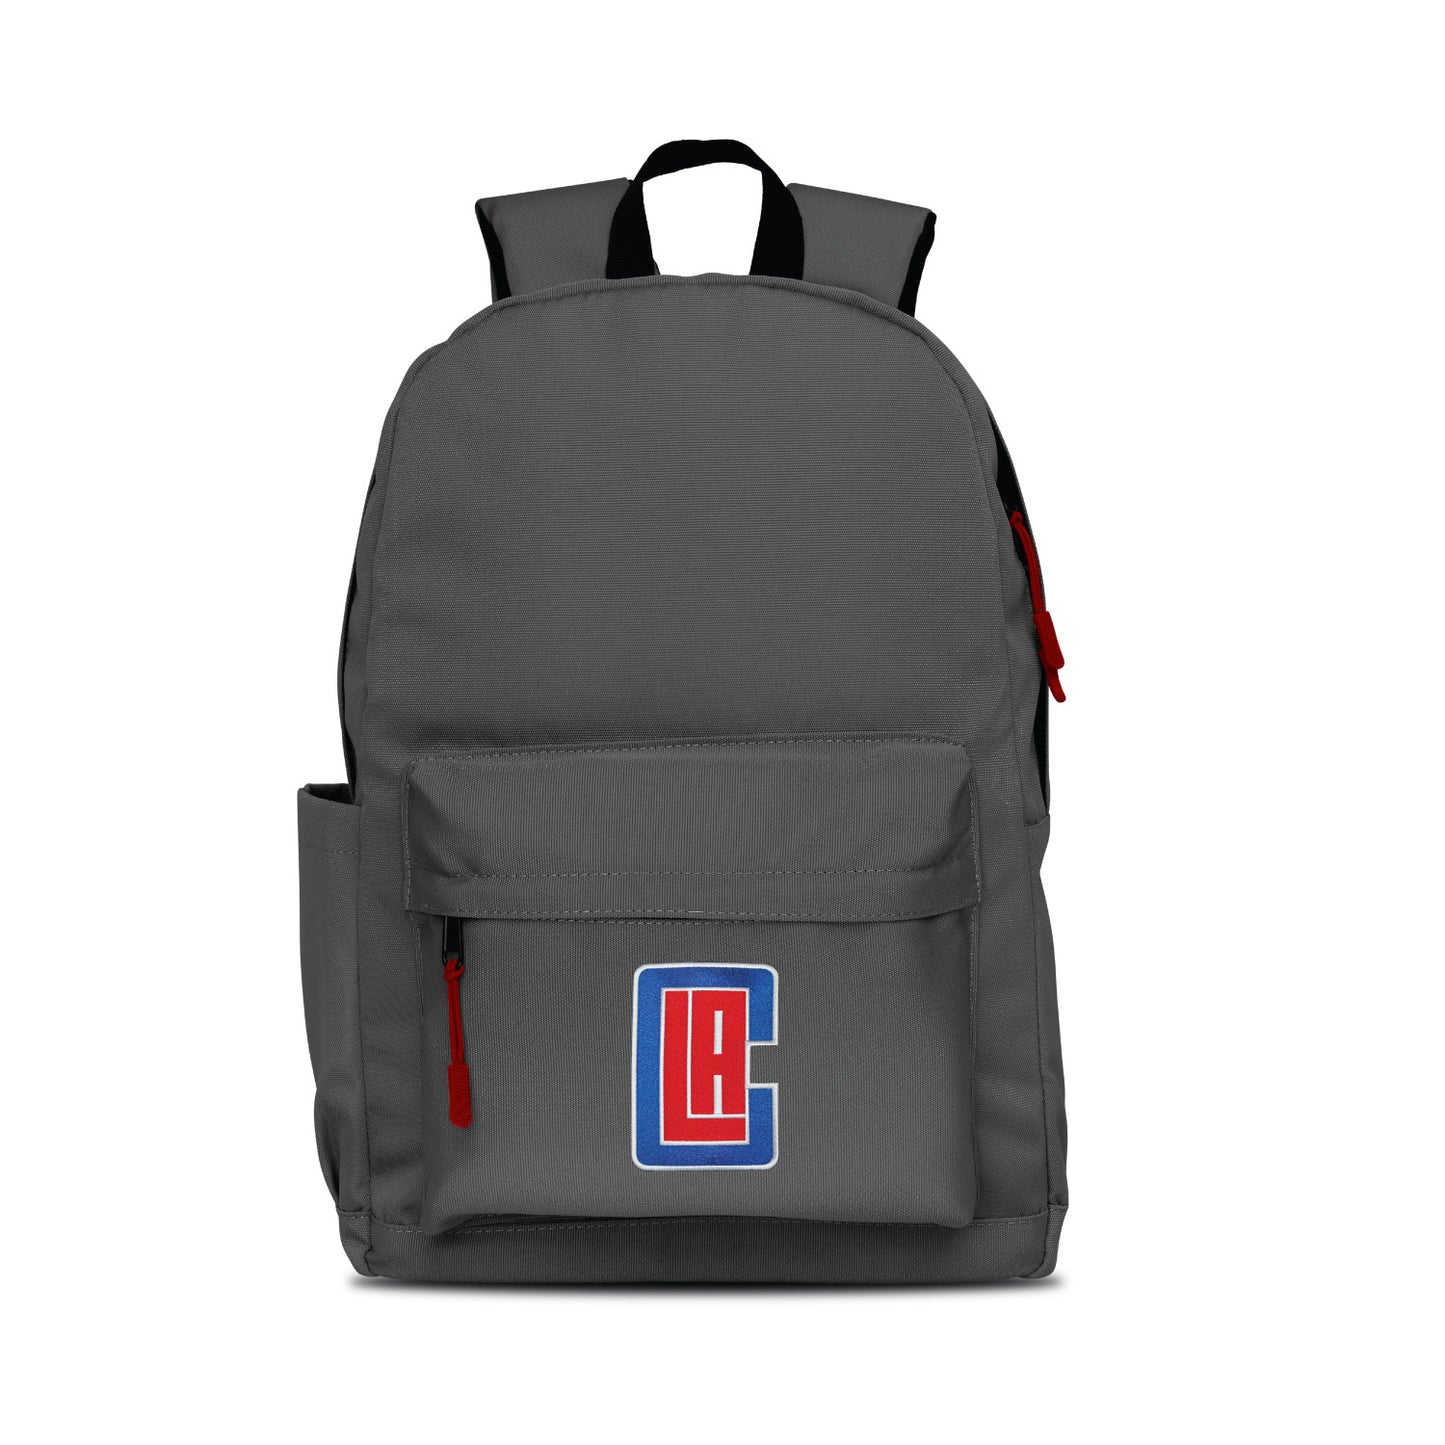 Los Angeles Clippers Campus Laptop Backpack - Gray